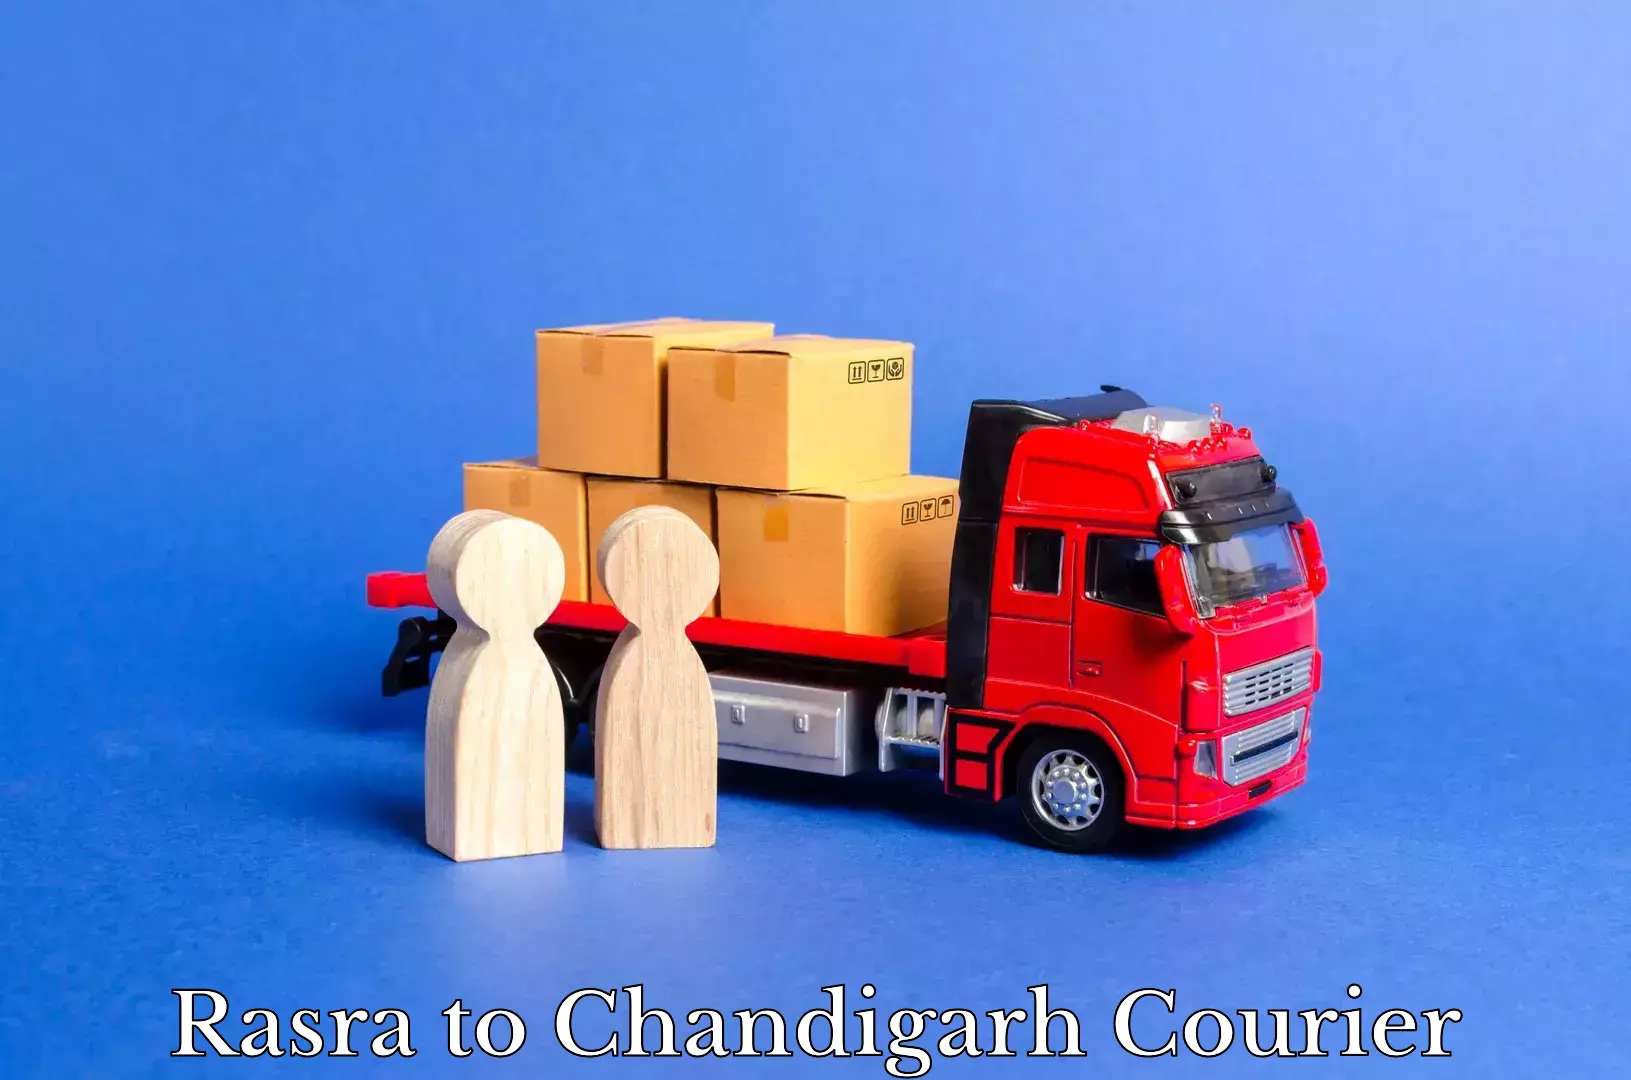 Express delivery capabilities Rasra to Chandigarh